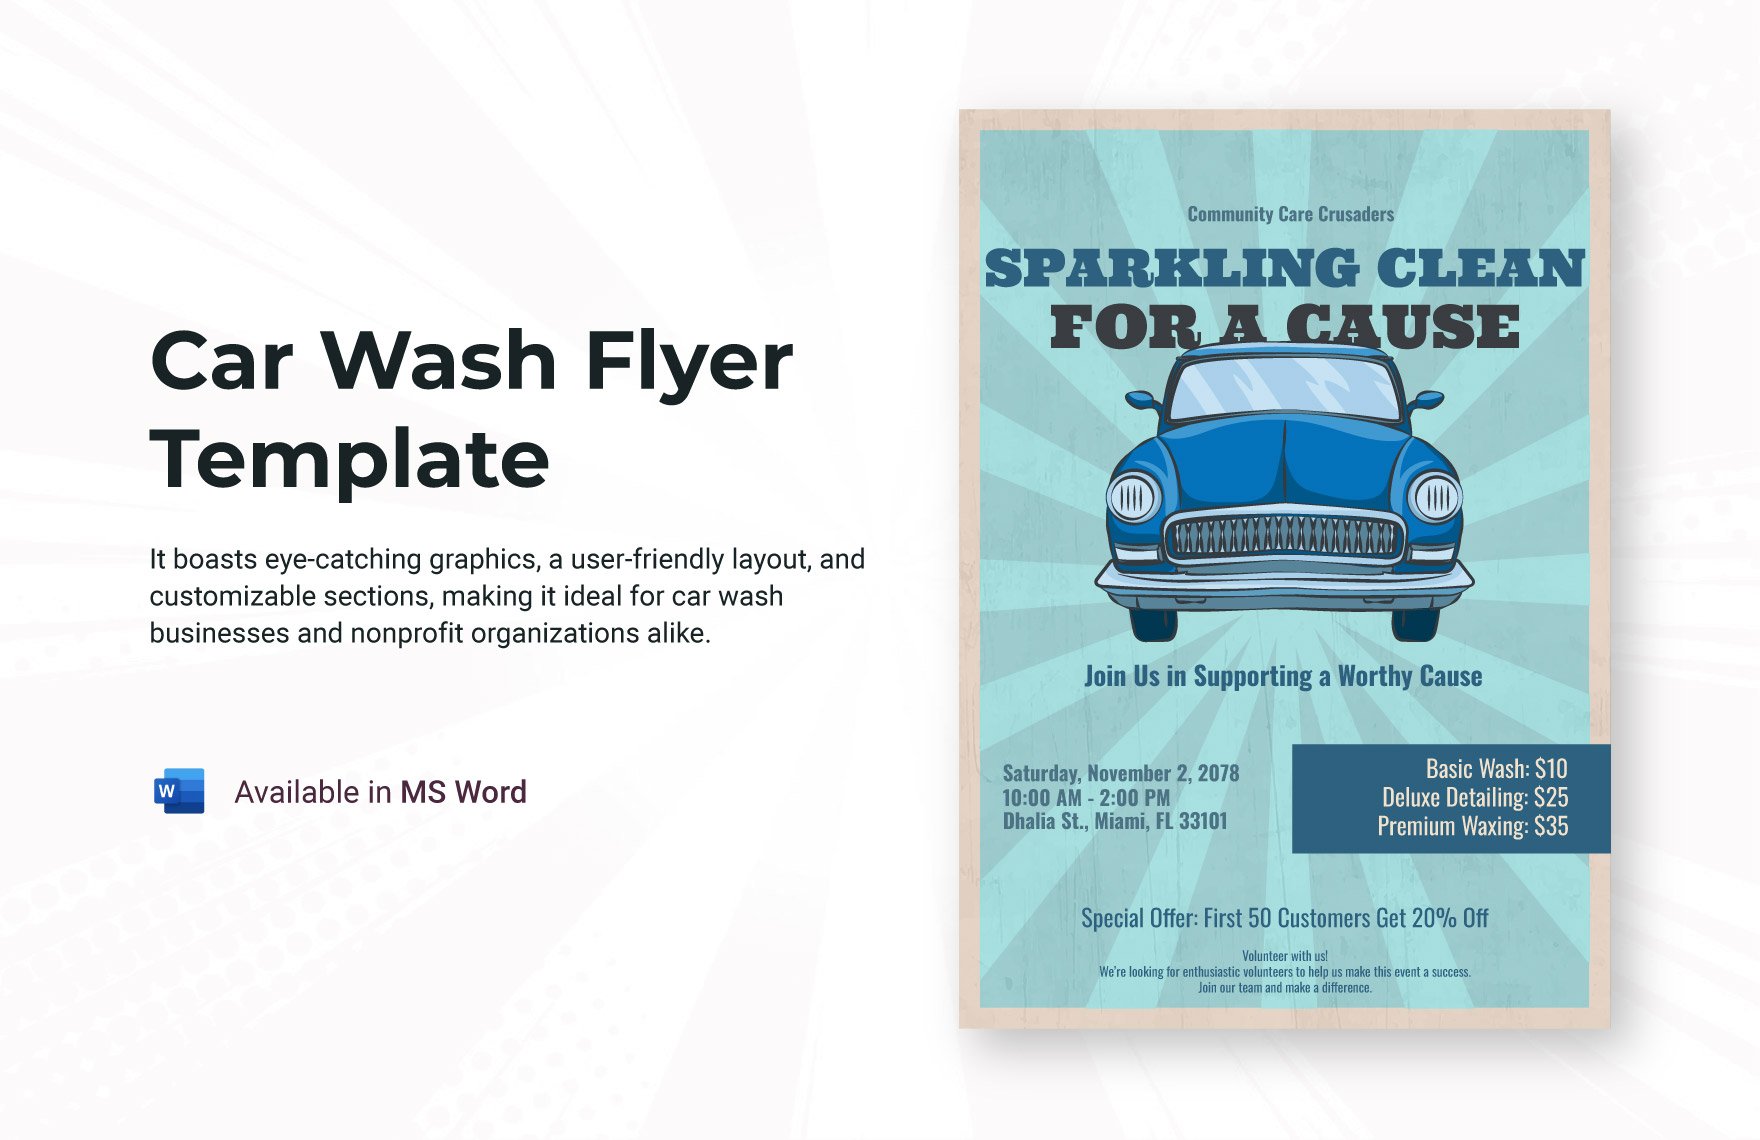 Car Wash Flyer Template in Word